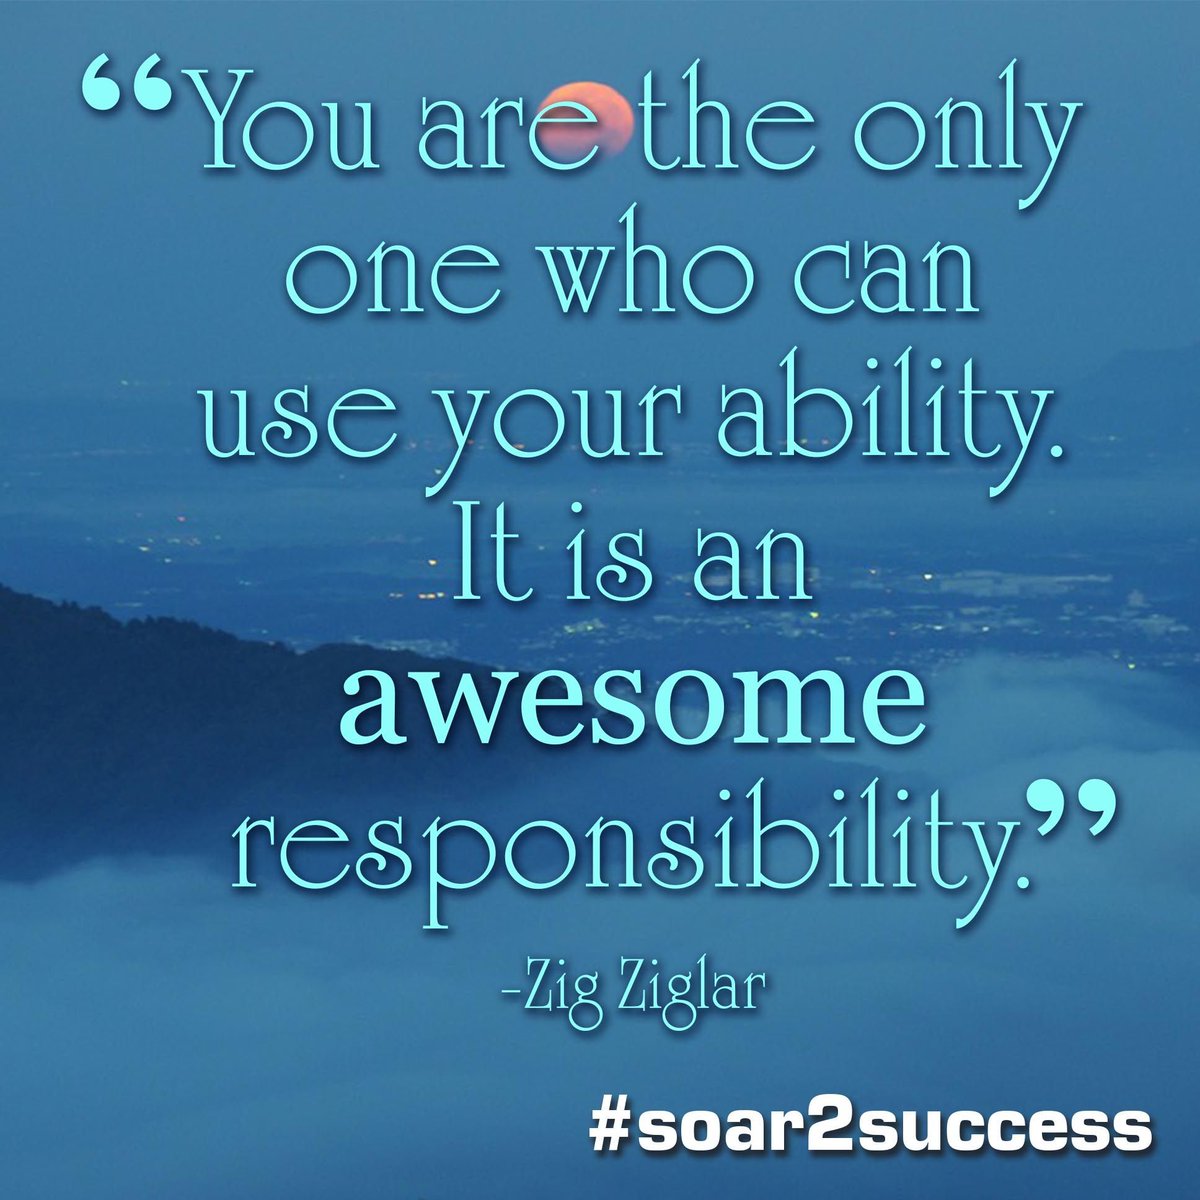 ''You are the only one who can use your ability. It is an awesome responsibility.'' - Zig Ziglar #Leadership #Pilotspeaker #Soar2Success